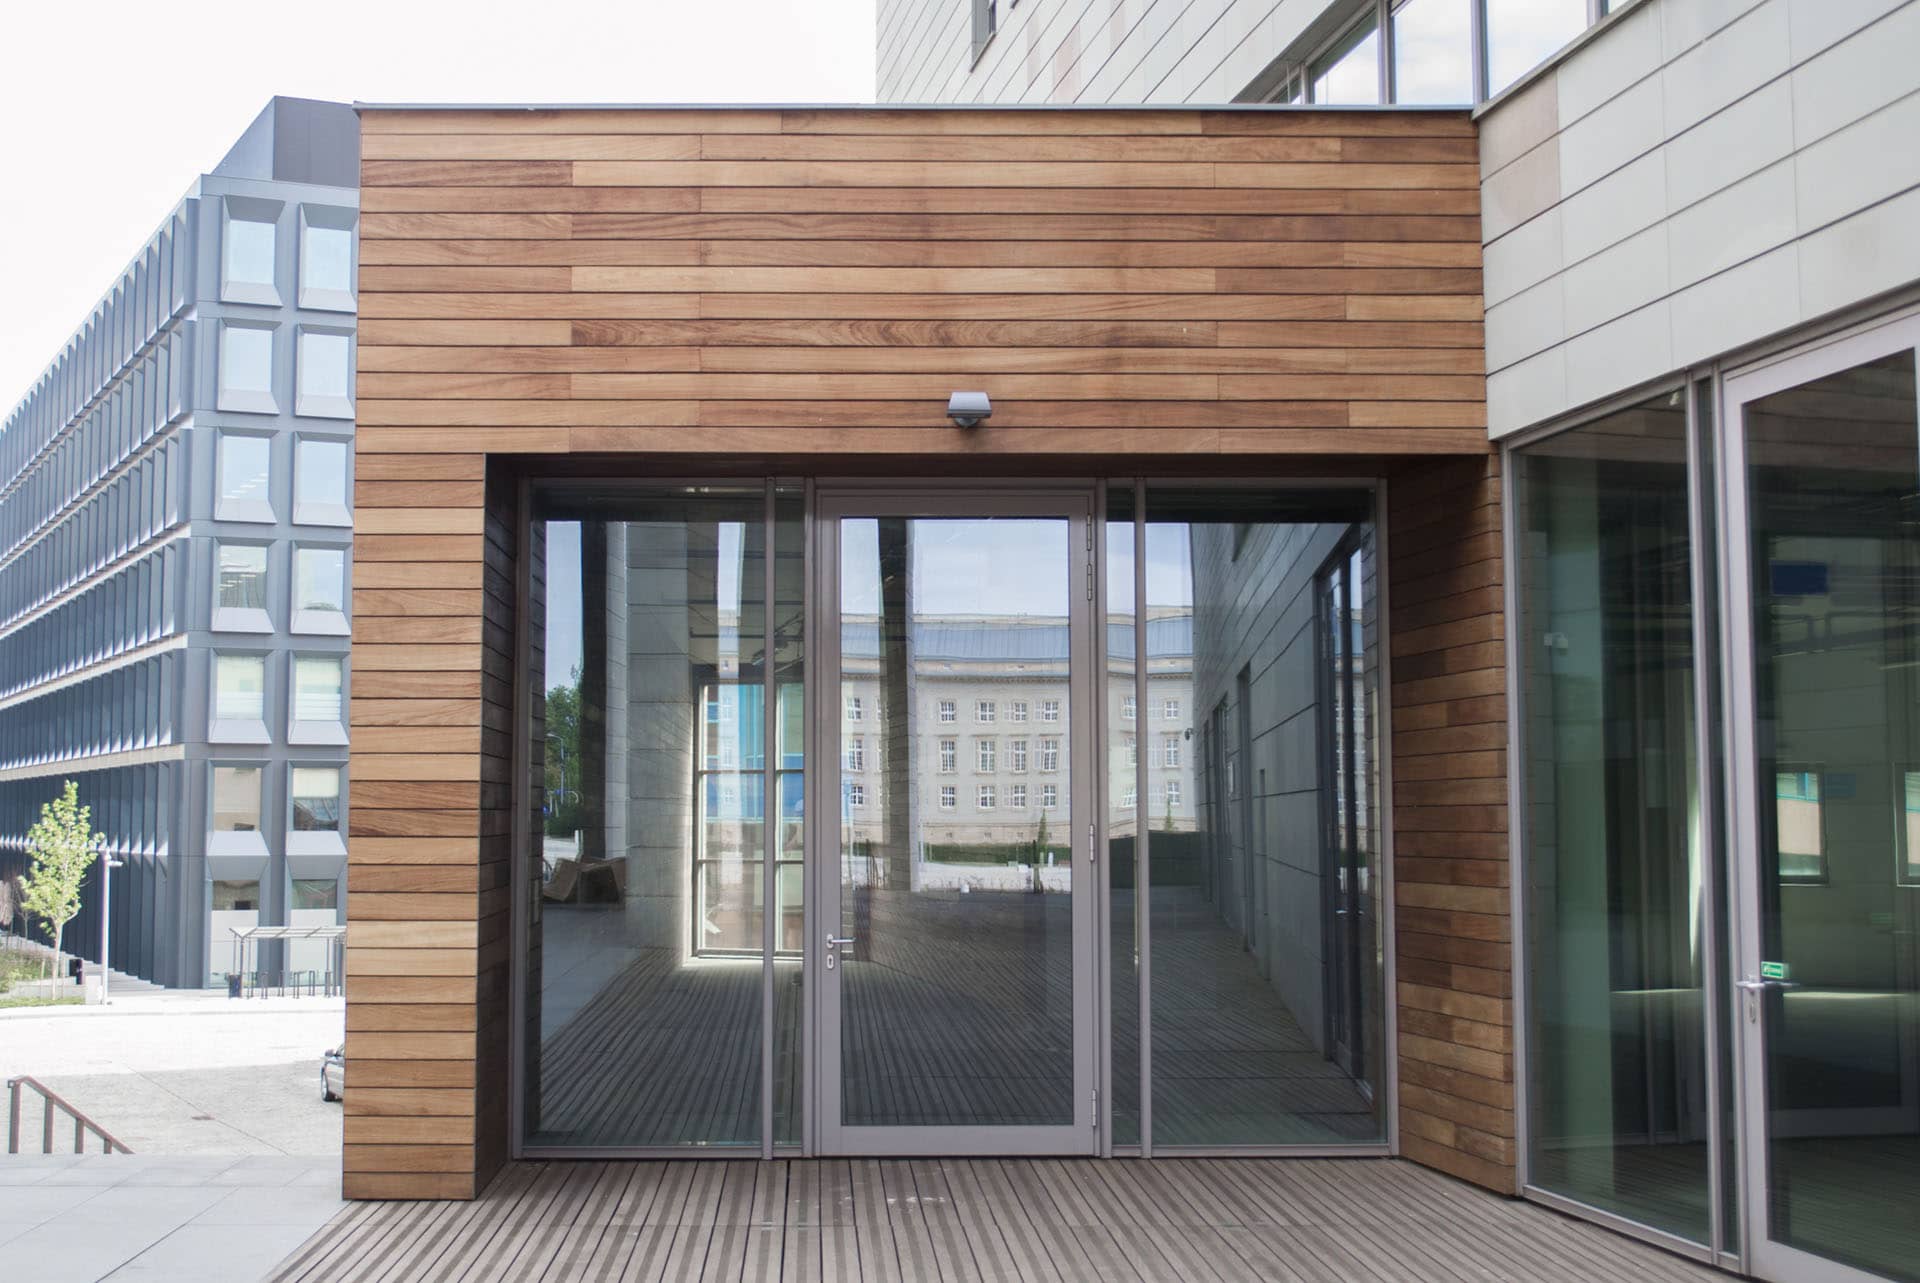 timber-cladding-weatherboards-external-sheet-material-outdoor-property-walls